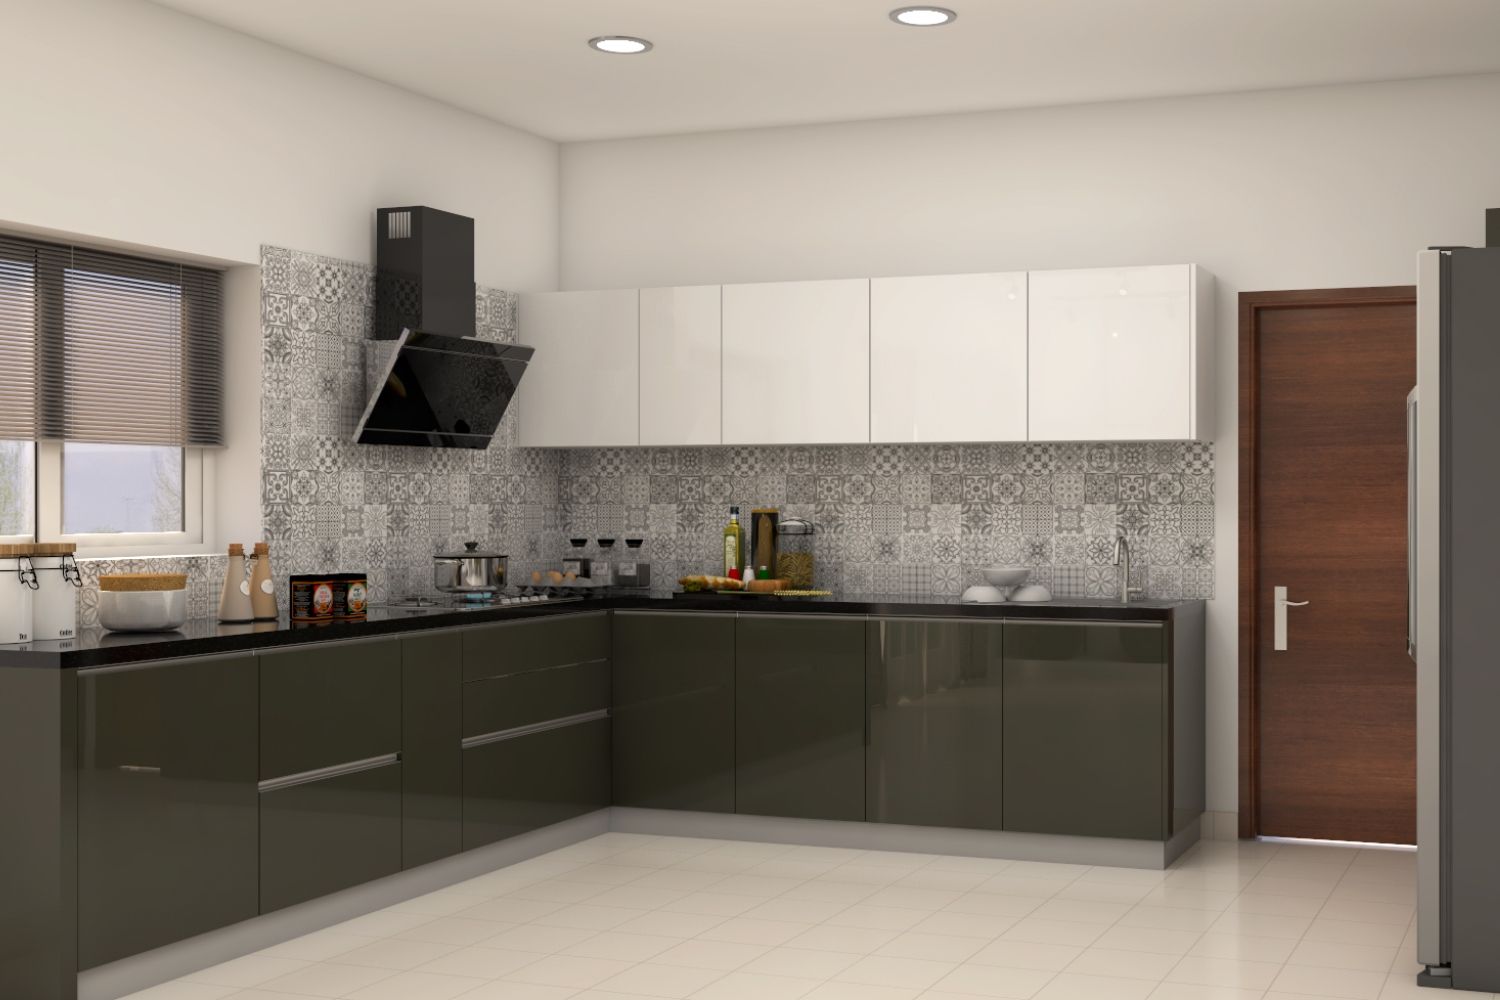 Modern L-Shaped Kitchen Design With Grey And White Cabinets